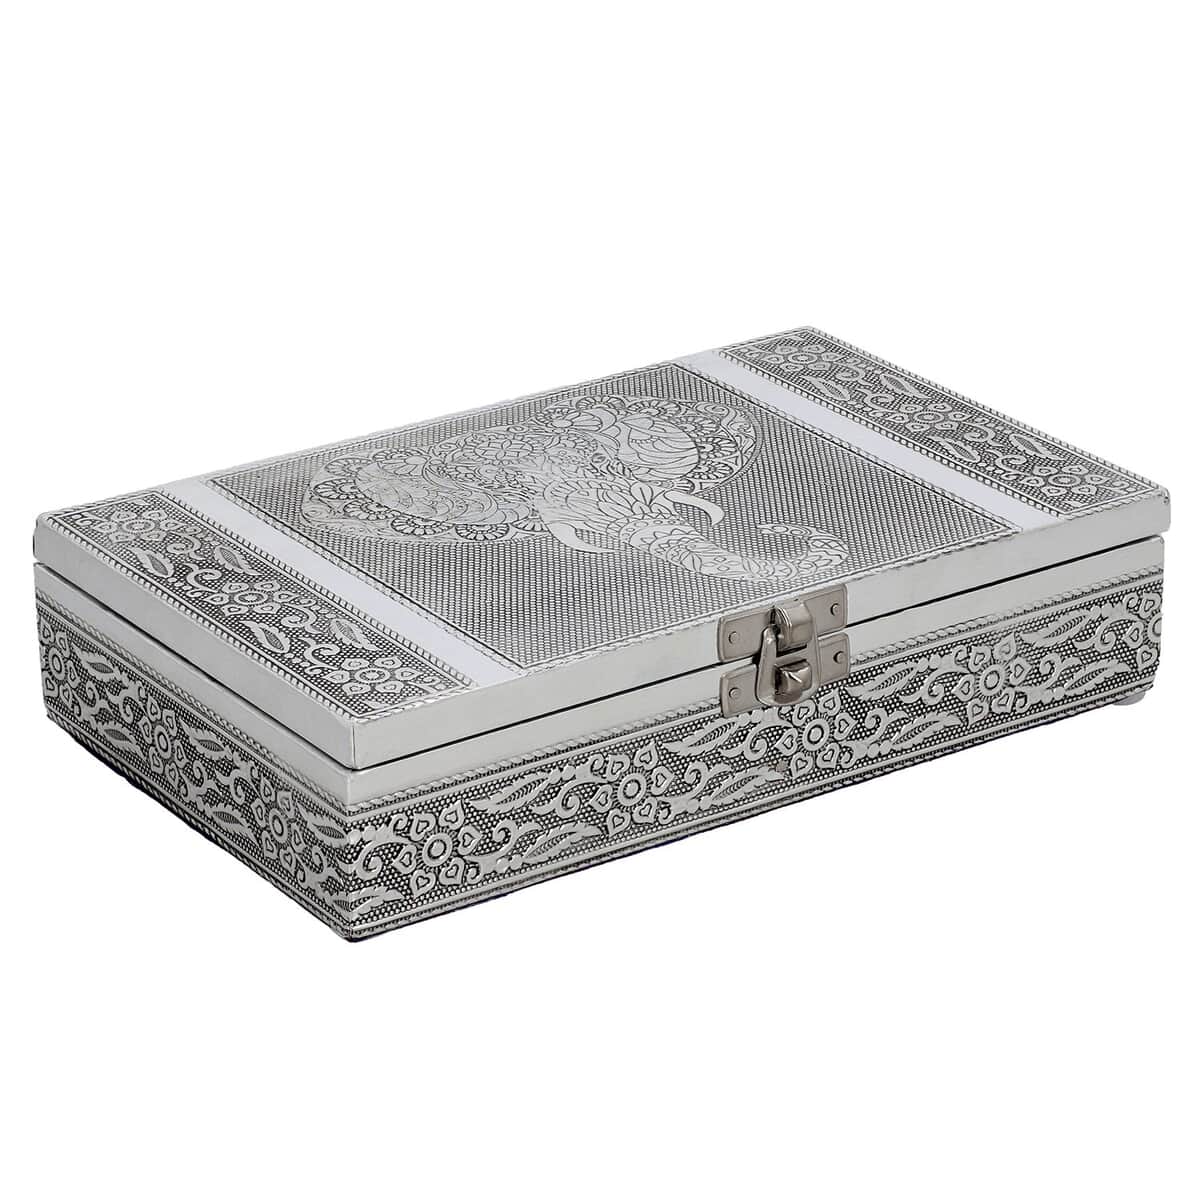 ADI'S EXCLUSIVE DEAL Aluminum Oxidized Elephant Face Pattern Half Empty and Half Ring Storage Jewelry Box with Anti Scratch Protection Interior image number 0